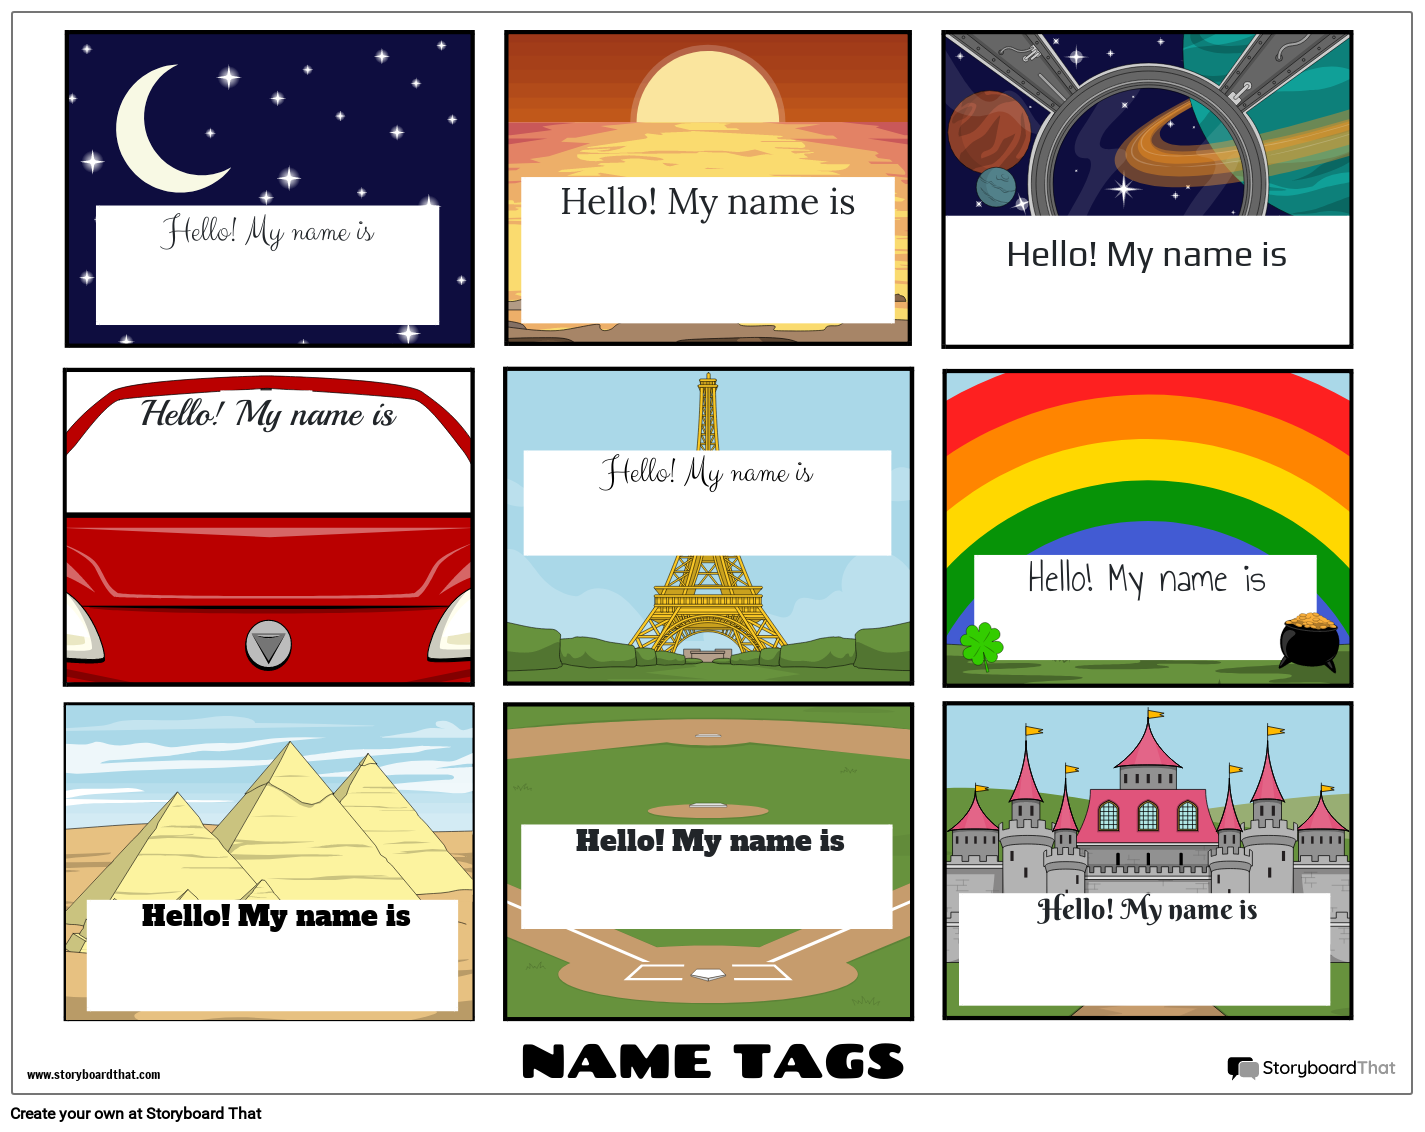 Name Tag Worksheet with Different Settings